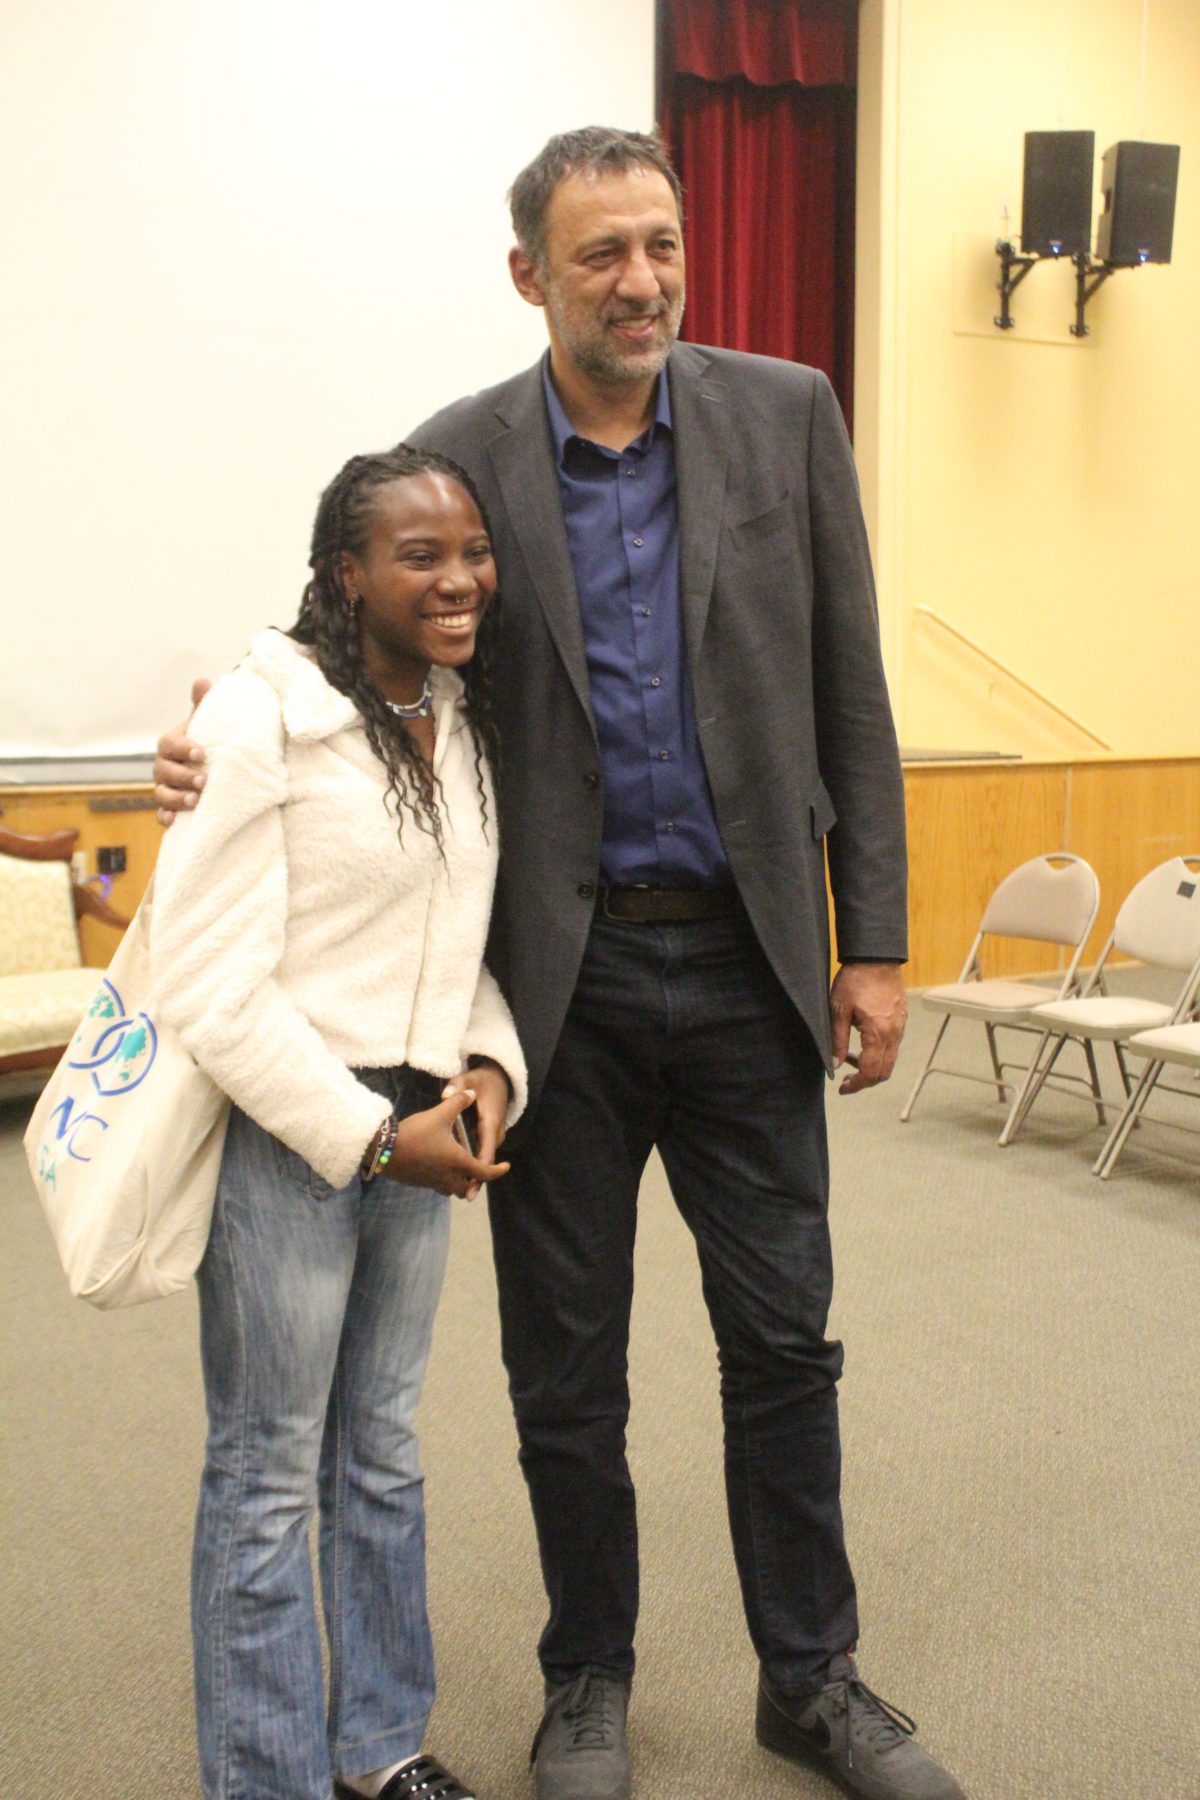 Hall of Fame NBA Player Vlade Divac Shares His Journey With UWC-USA Students